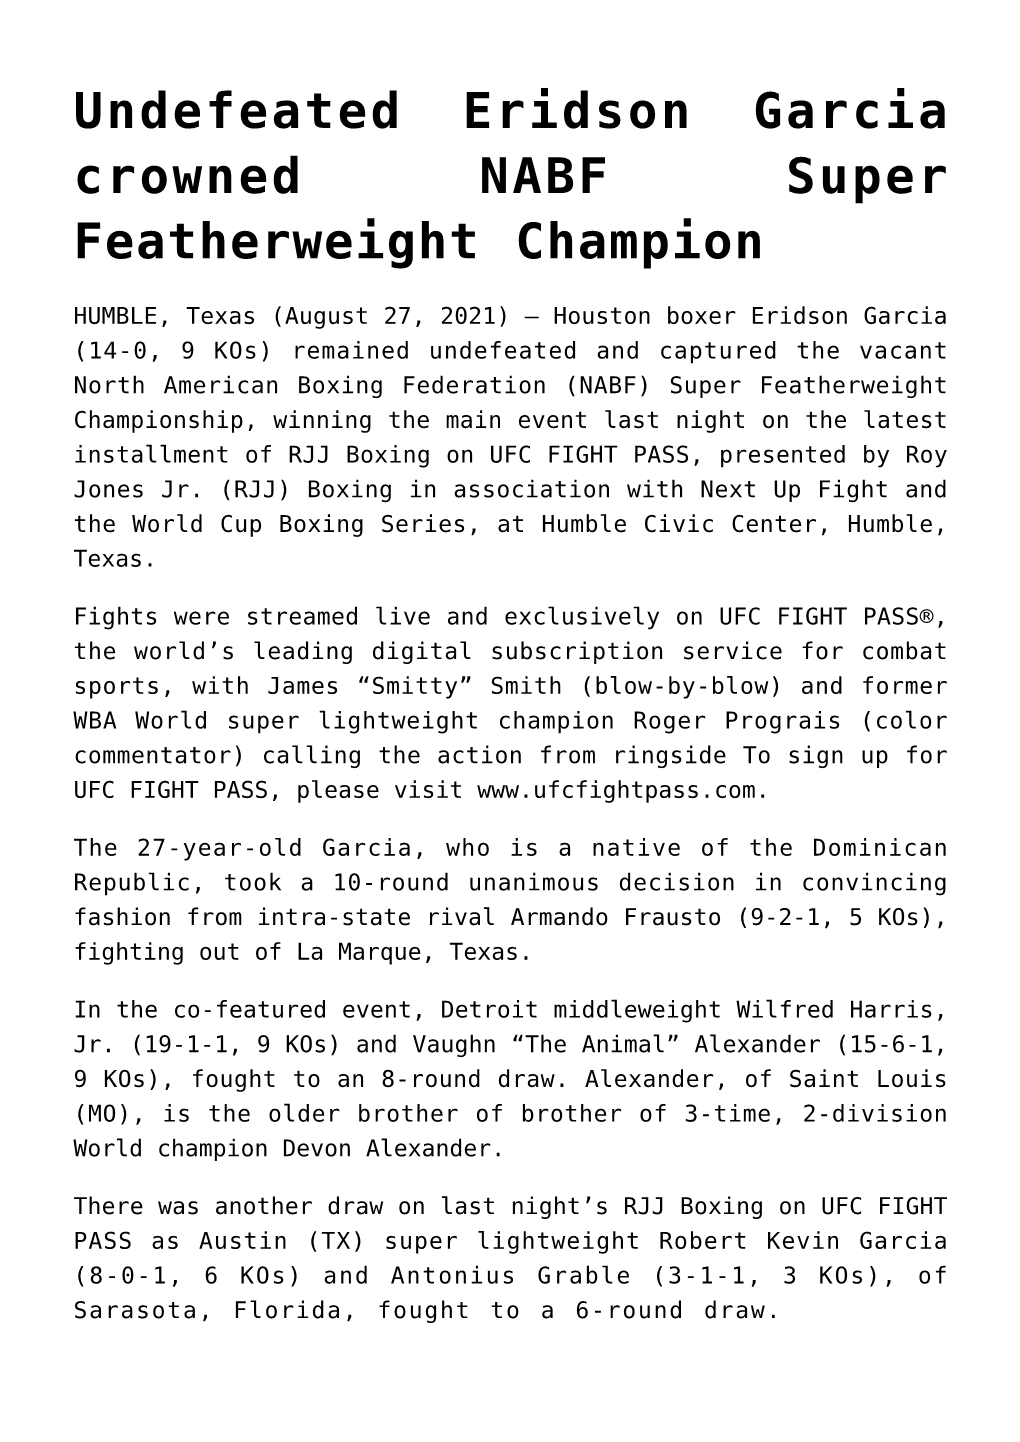 Undefeated Eridson Garcia Crowned NABF Super Featherweight Champion